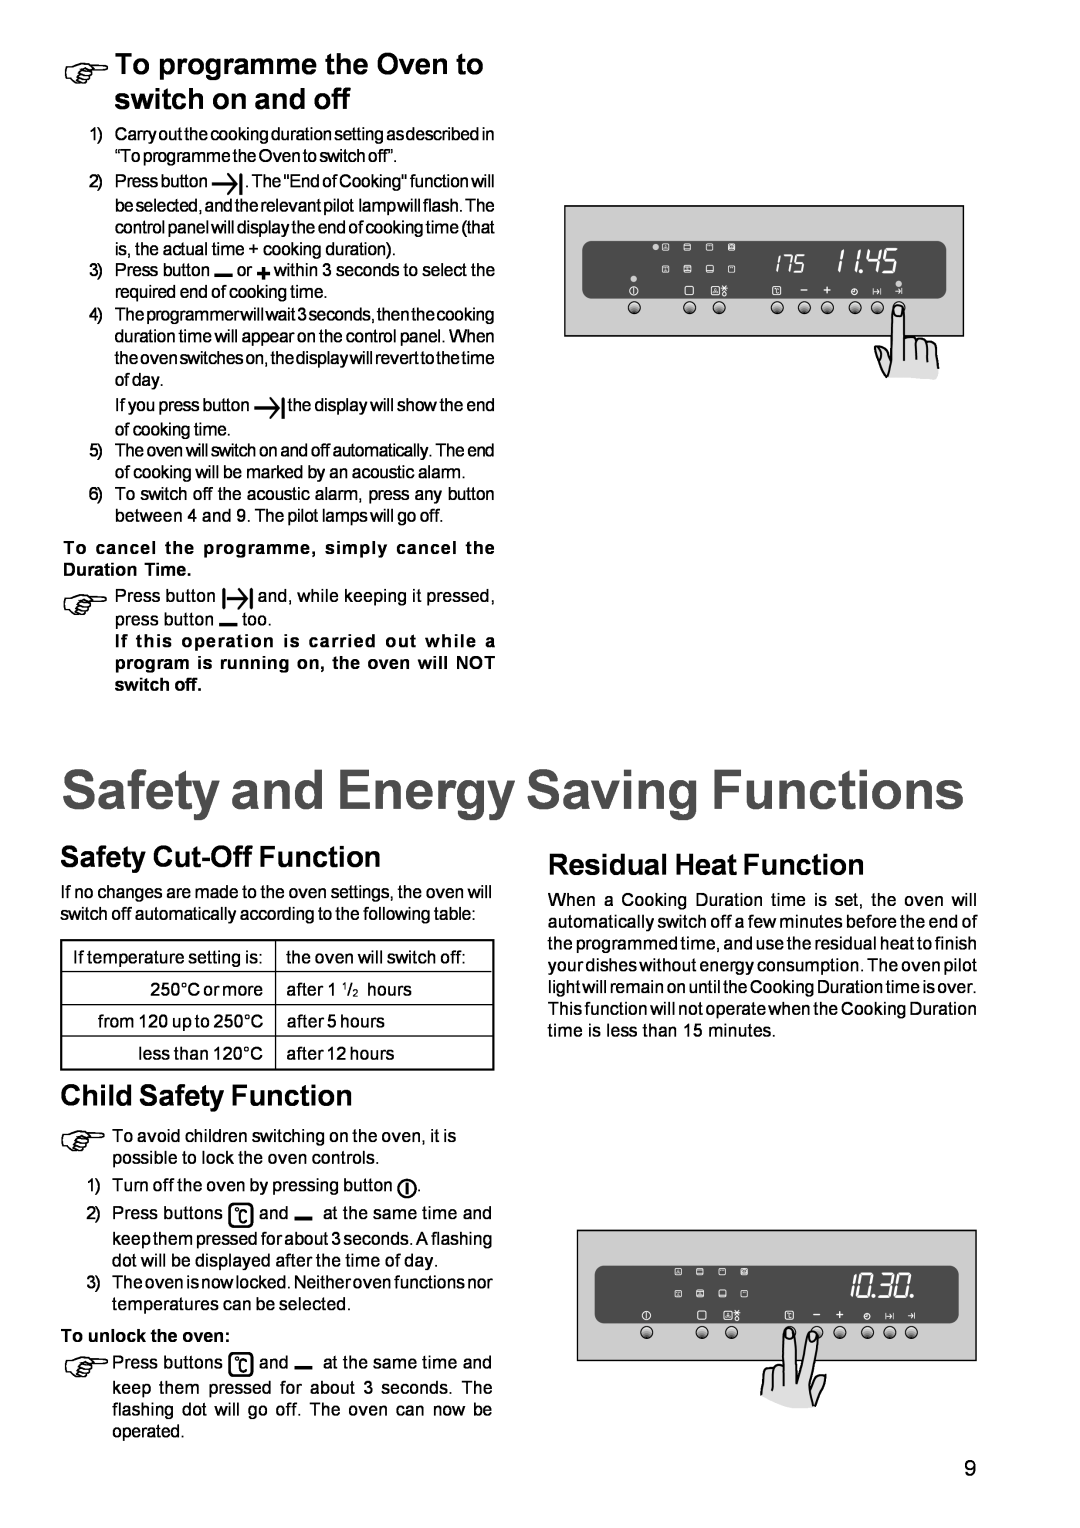 Zanussi ZBM 972 Safety and Energy Saving Functions, ΦTo programme the Oven to switch on and off, Safety Cut-Off Function 